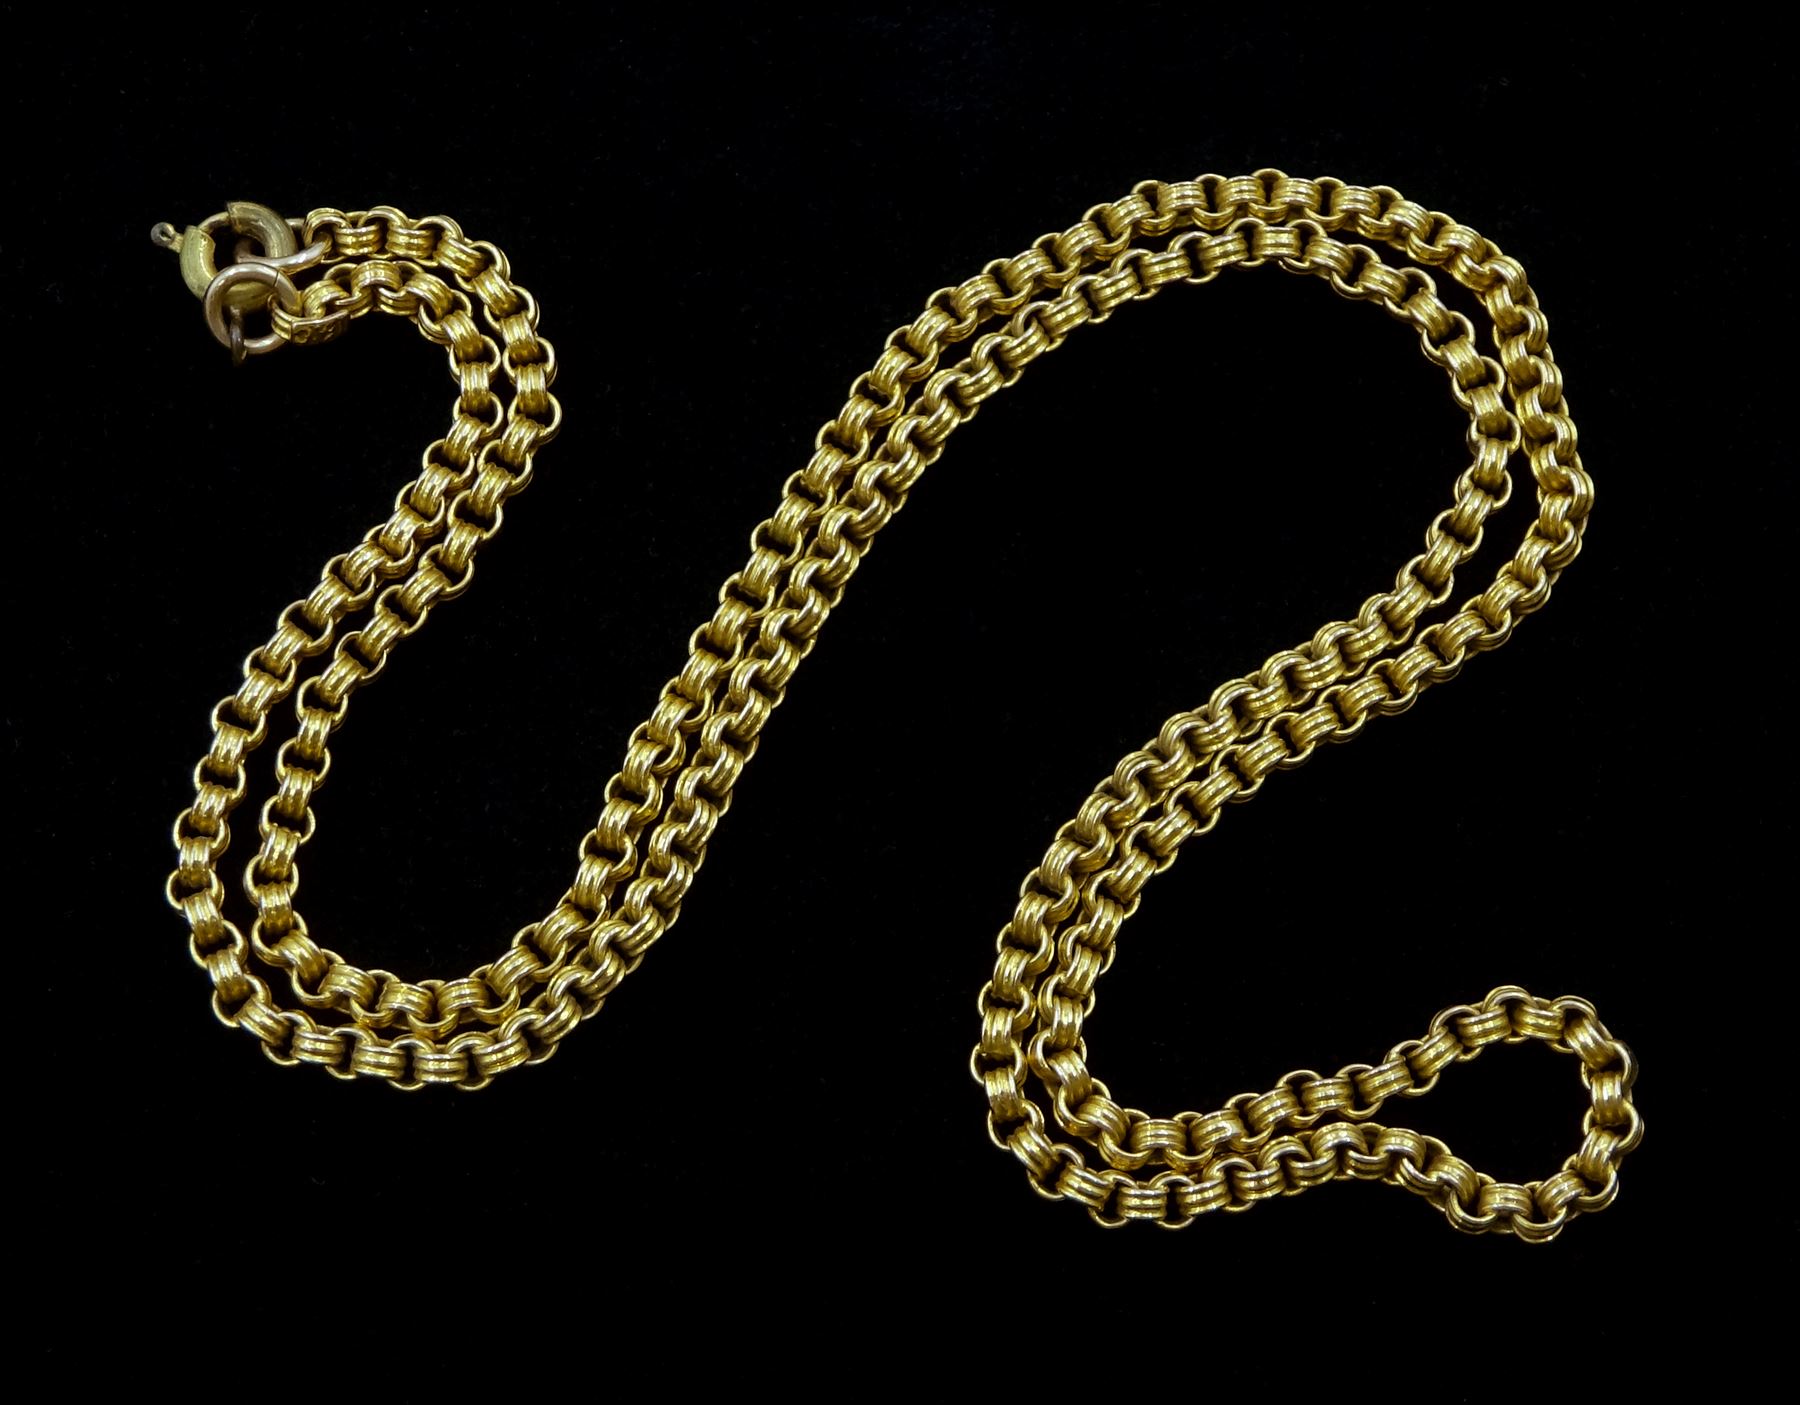 Early 20th century gold circular link chain necklace - Image 2 of 2